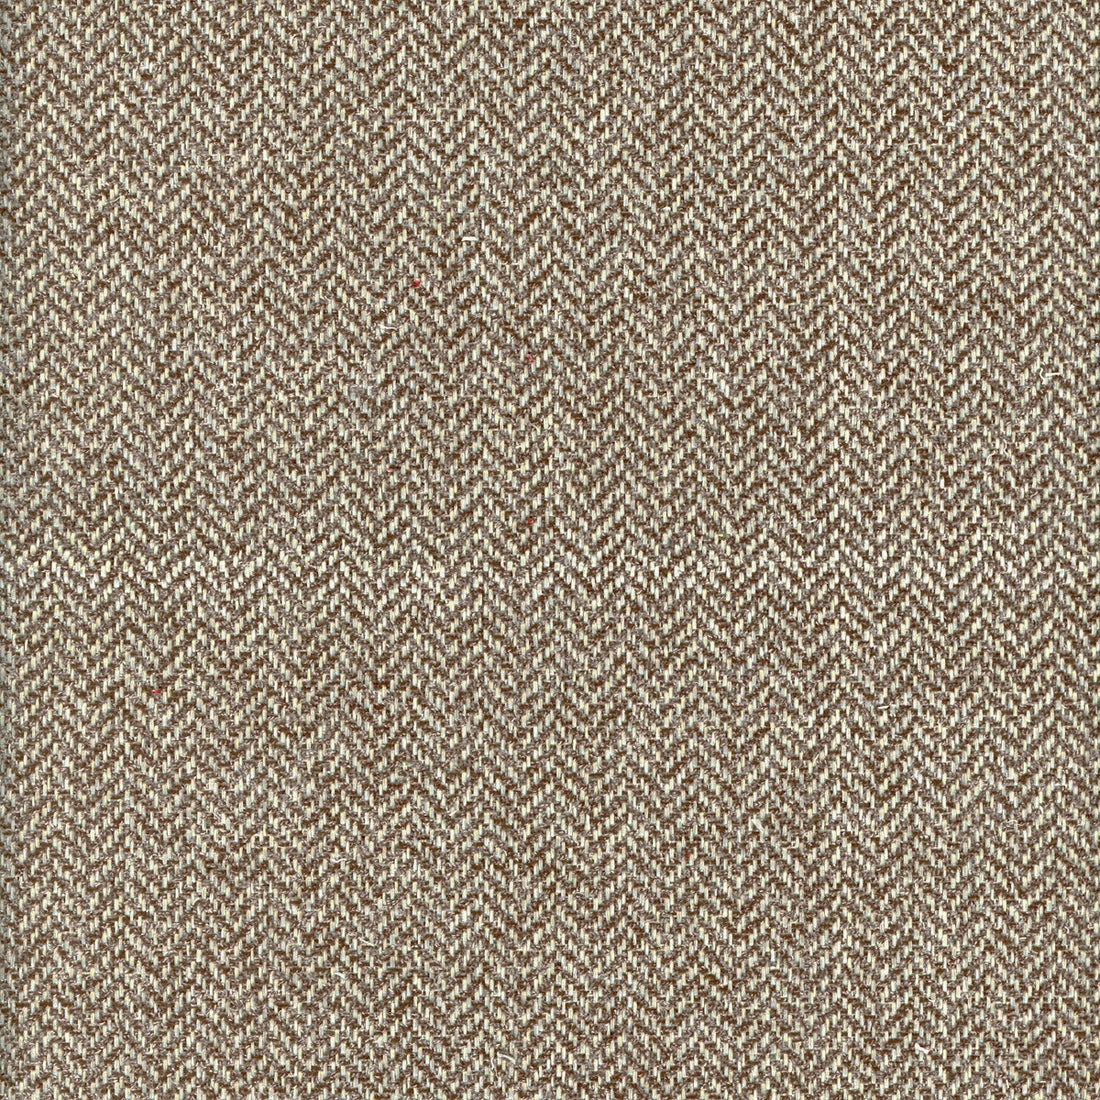 Nevada fabric in timber color - pattern AM100329.6.0 - by Kravet Couture in the Andrew Martin Canyon collection